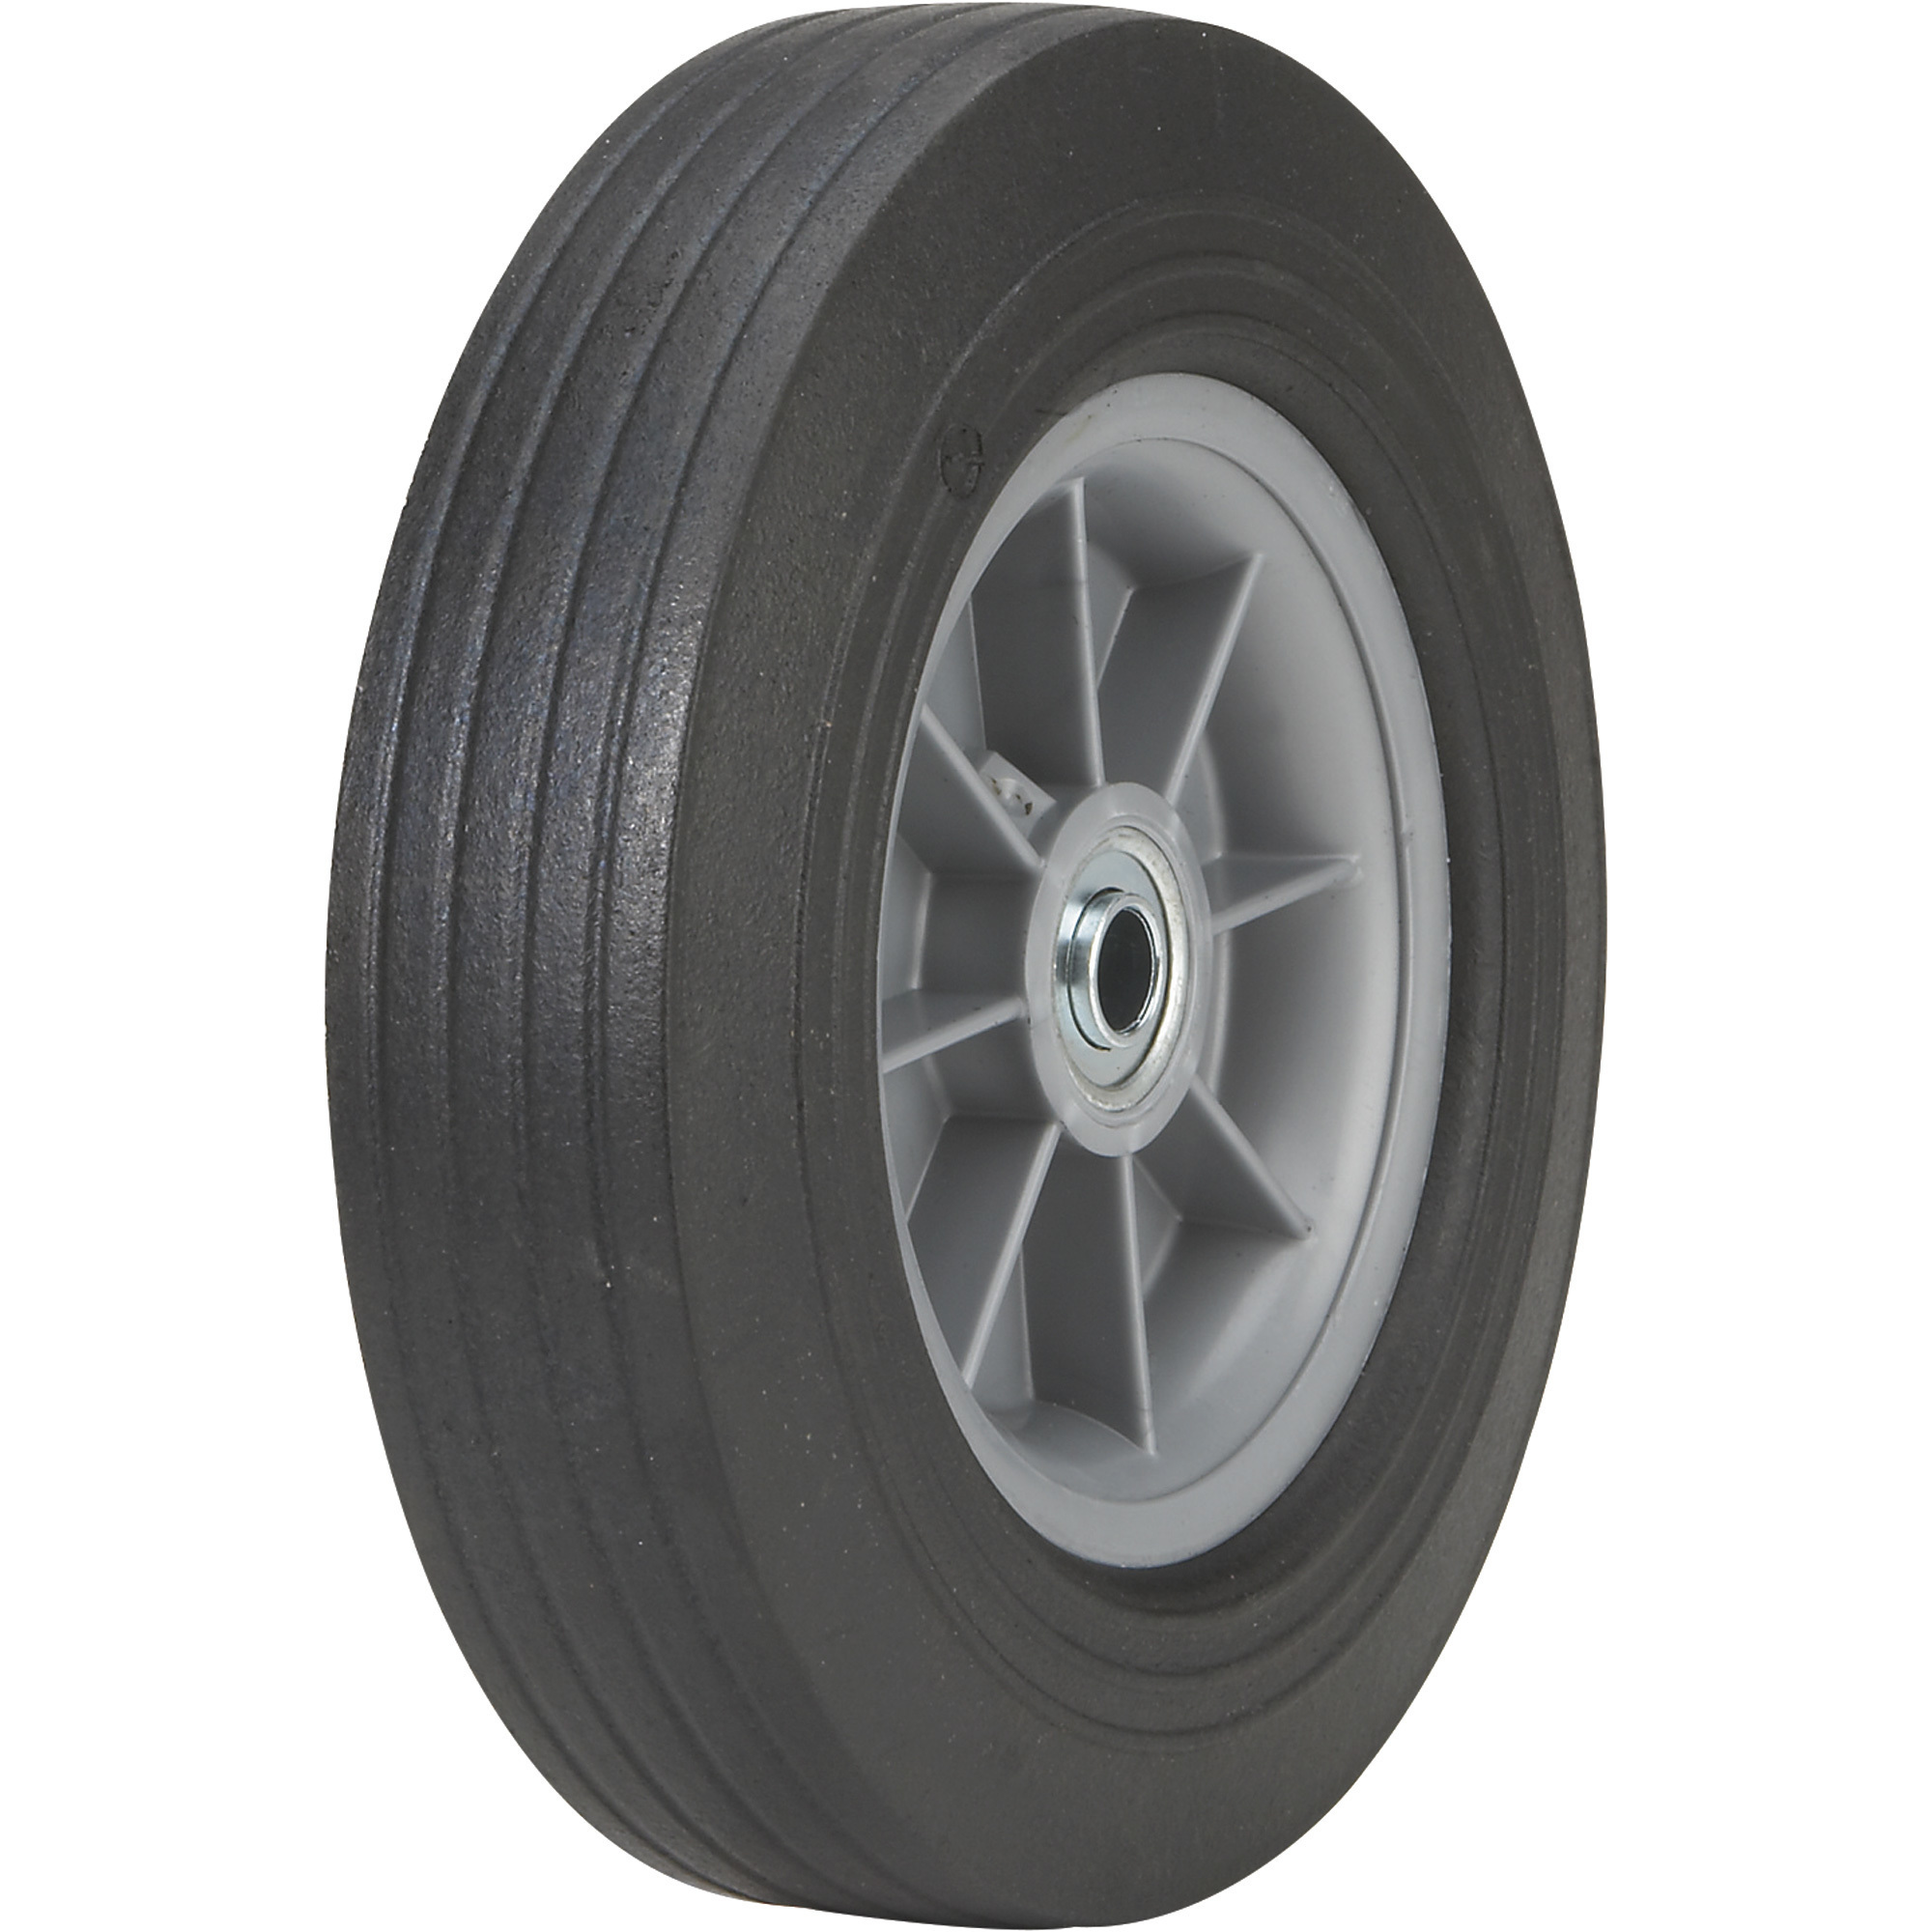 Martin Flat-Free Solid Rubber Tire and Poly Wheel â 10 x 2.75 Tire, Model ZP1102RT-202